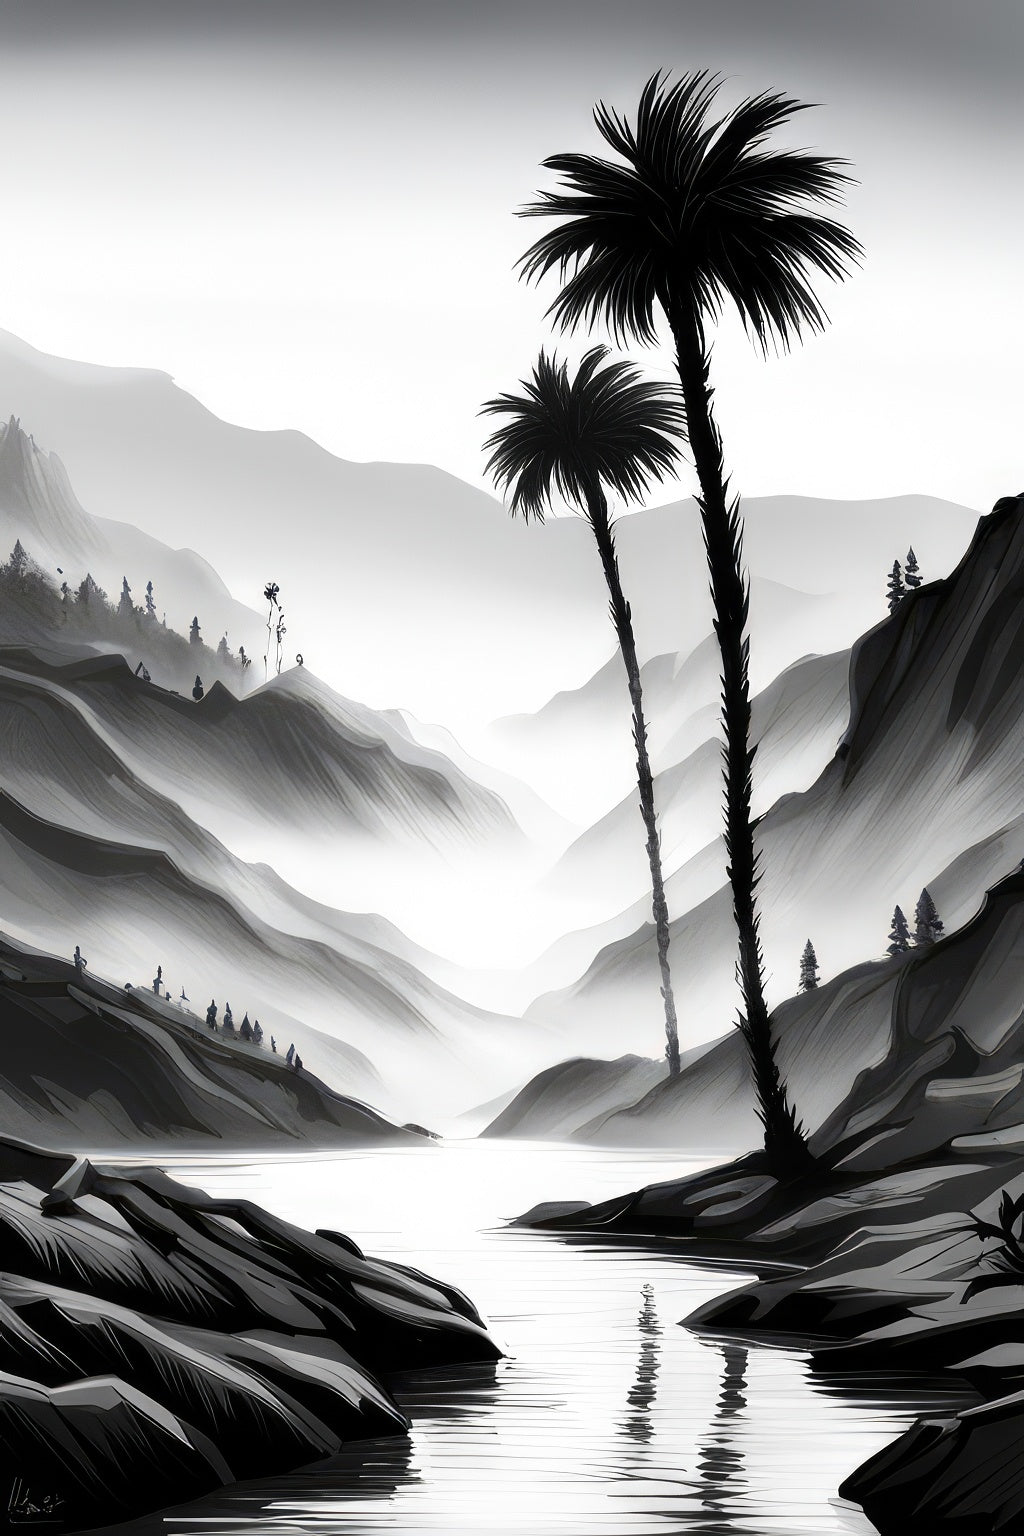 Two Palms Along A River Black and White Illustration Art Print